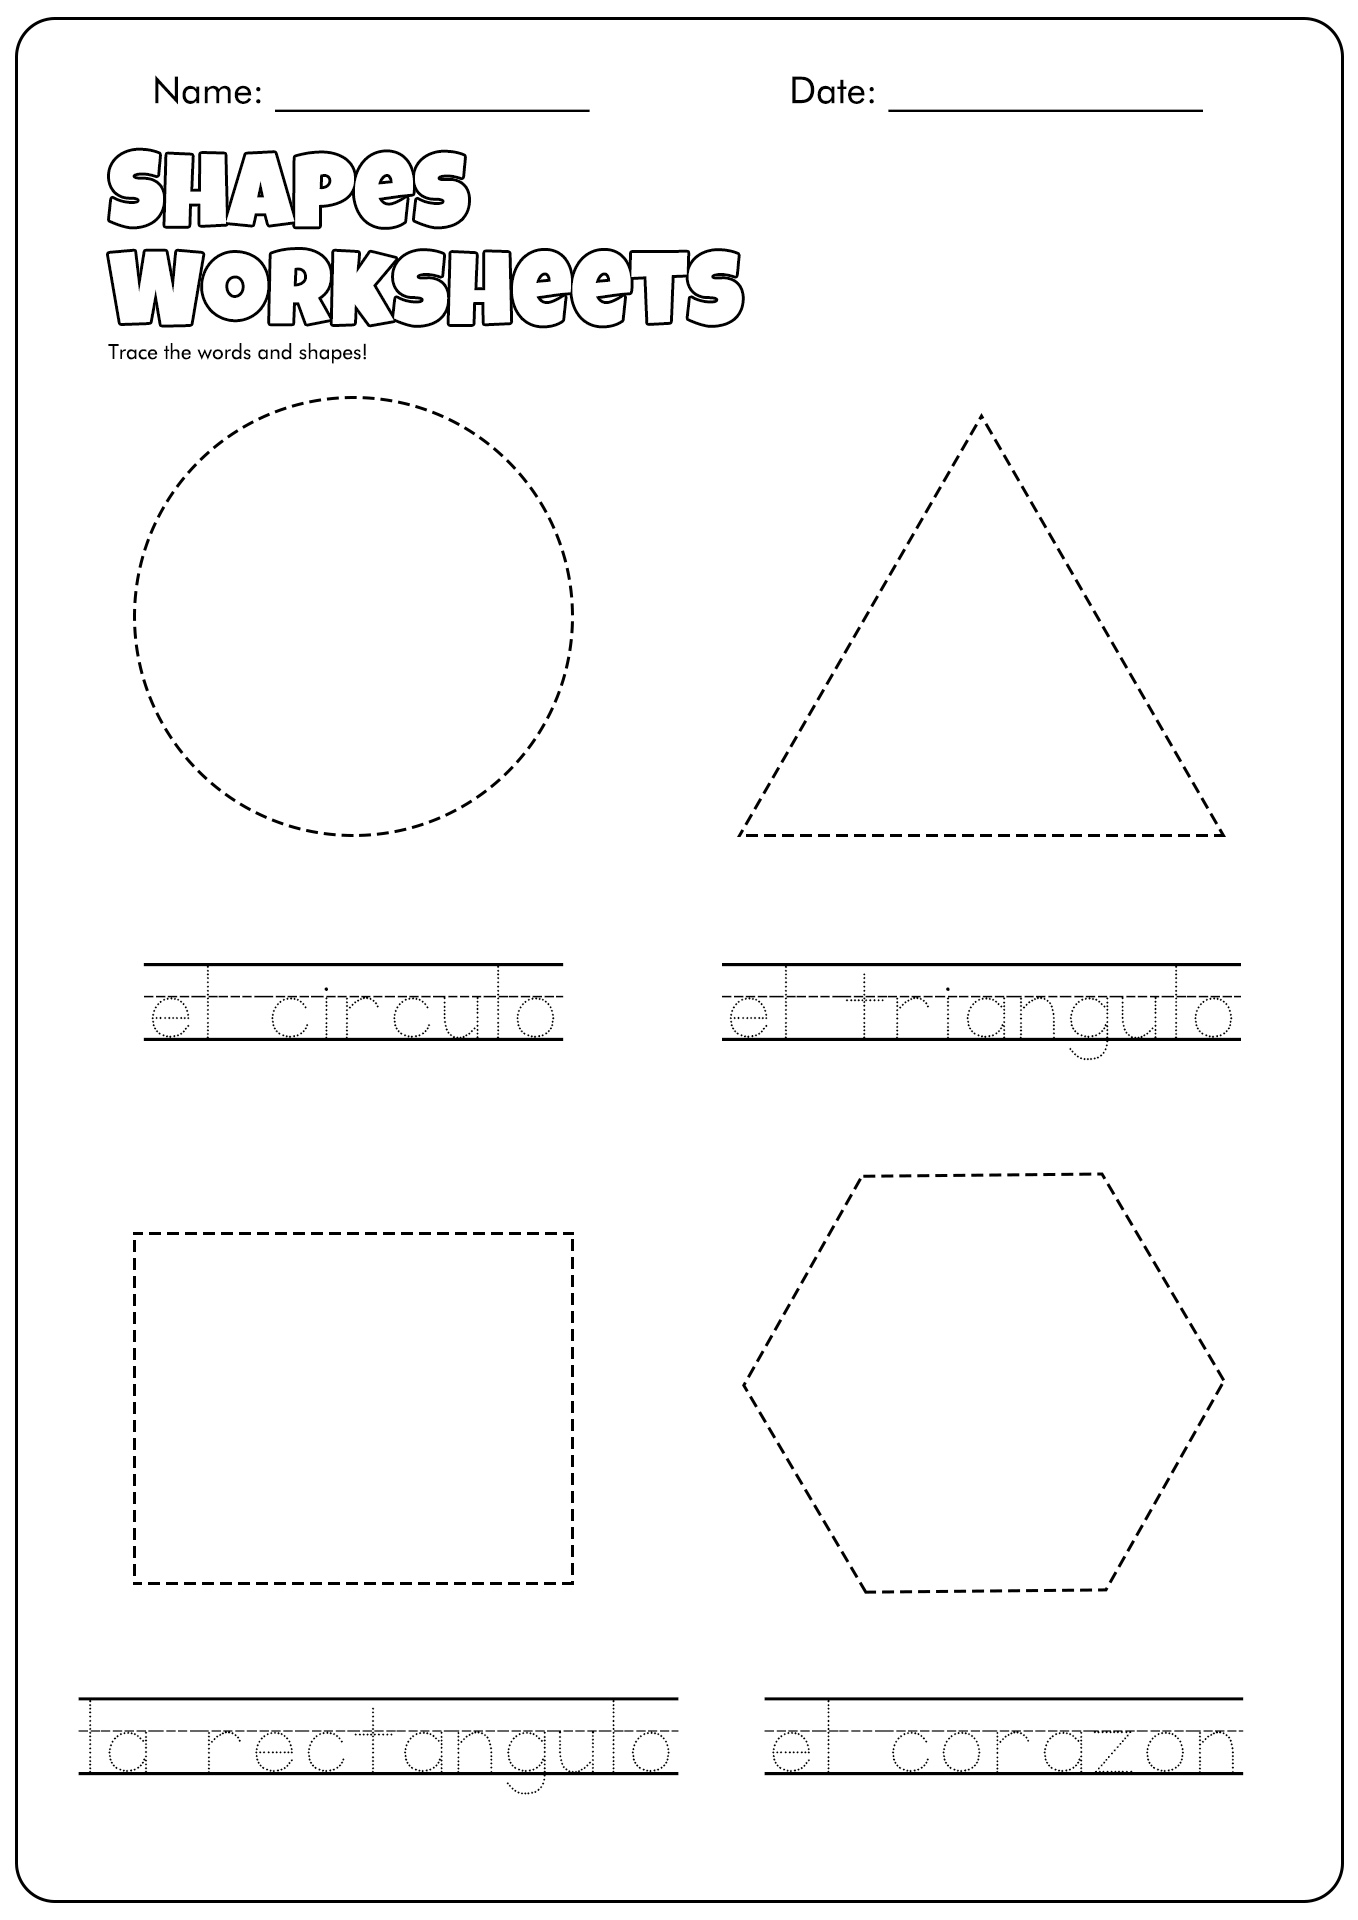 Shapes Worksheets in Spanish